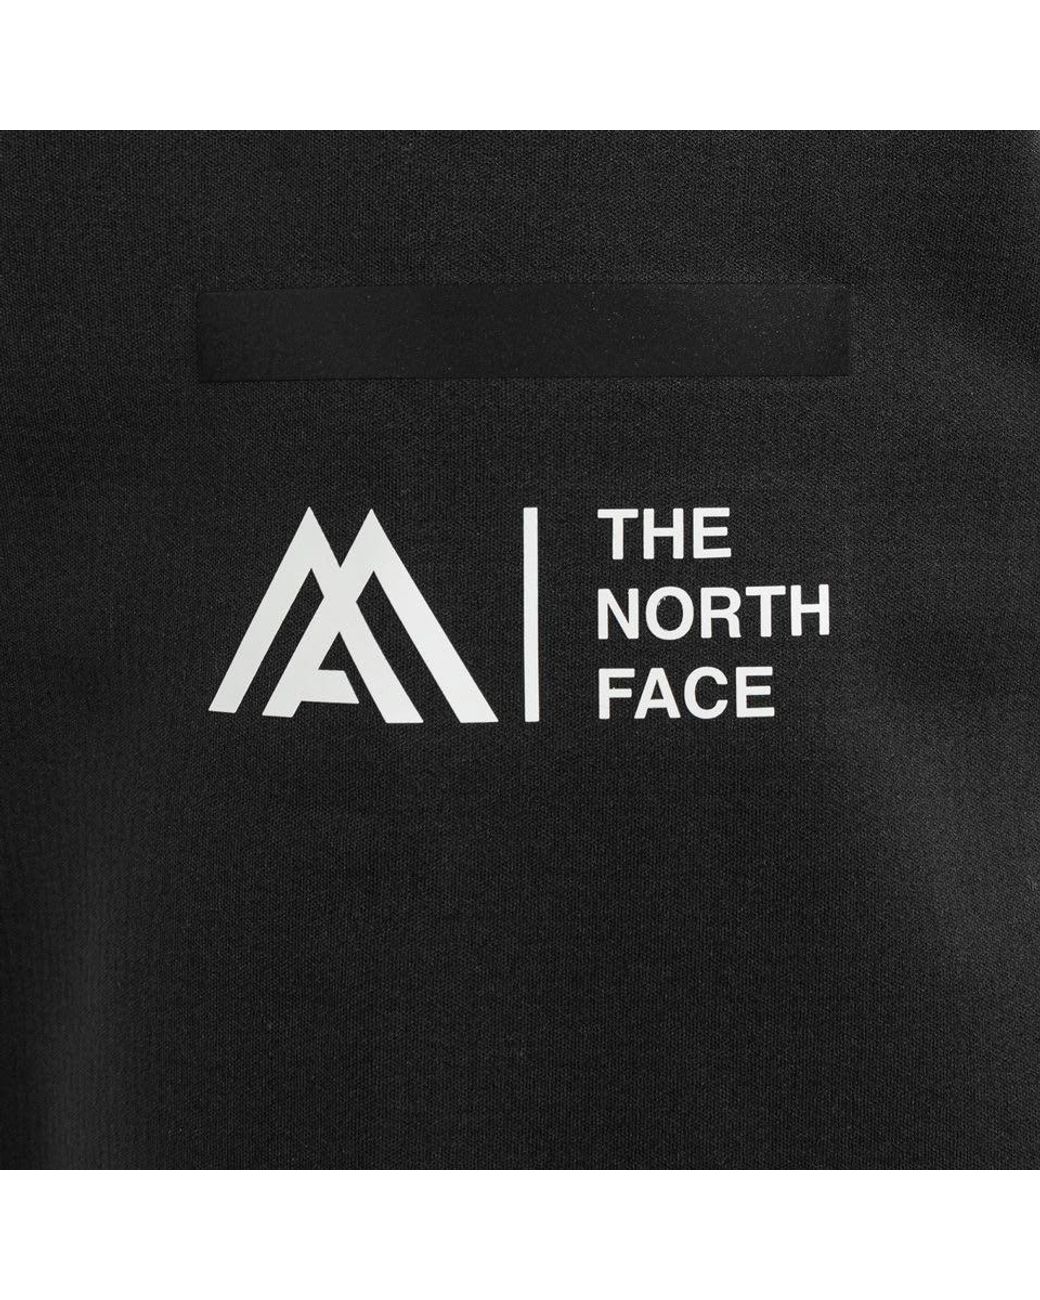 The North Face Softshell Jacket in Black for Men | Lyst